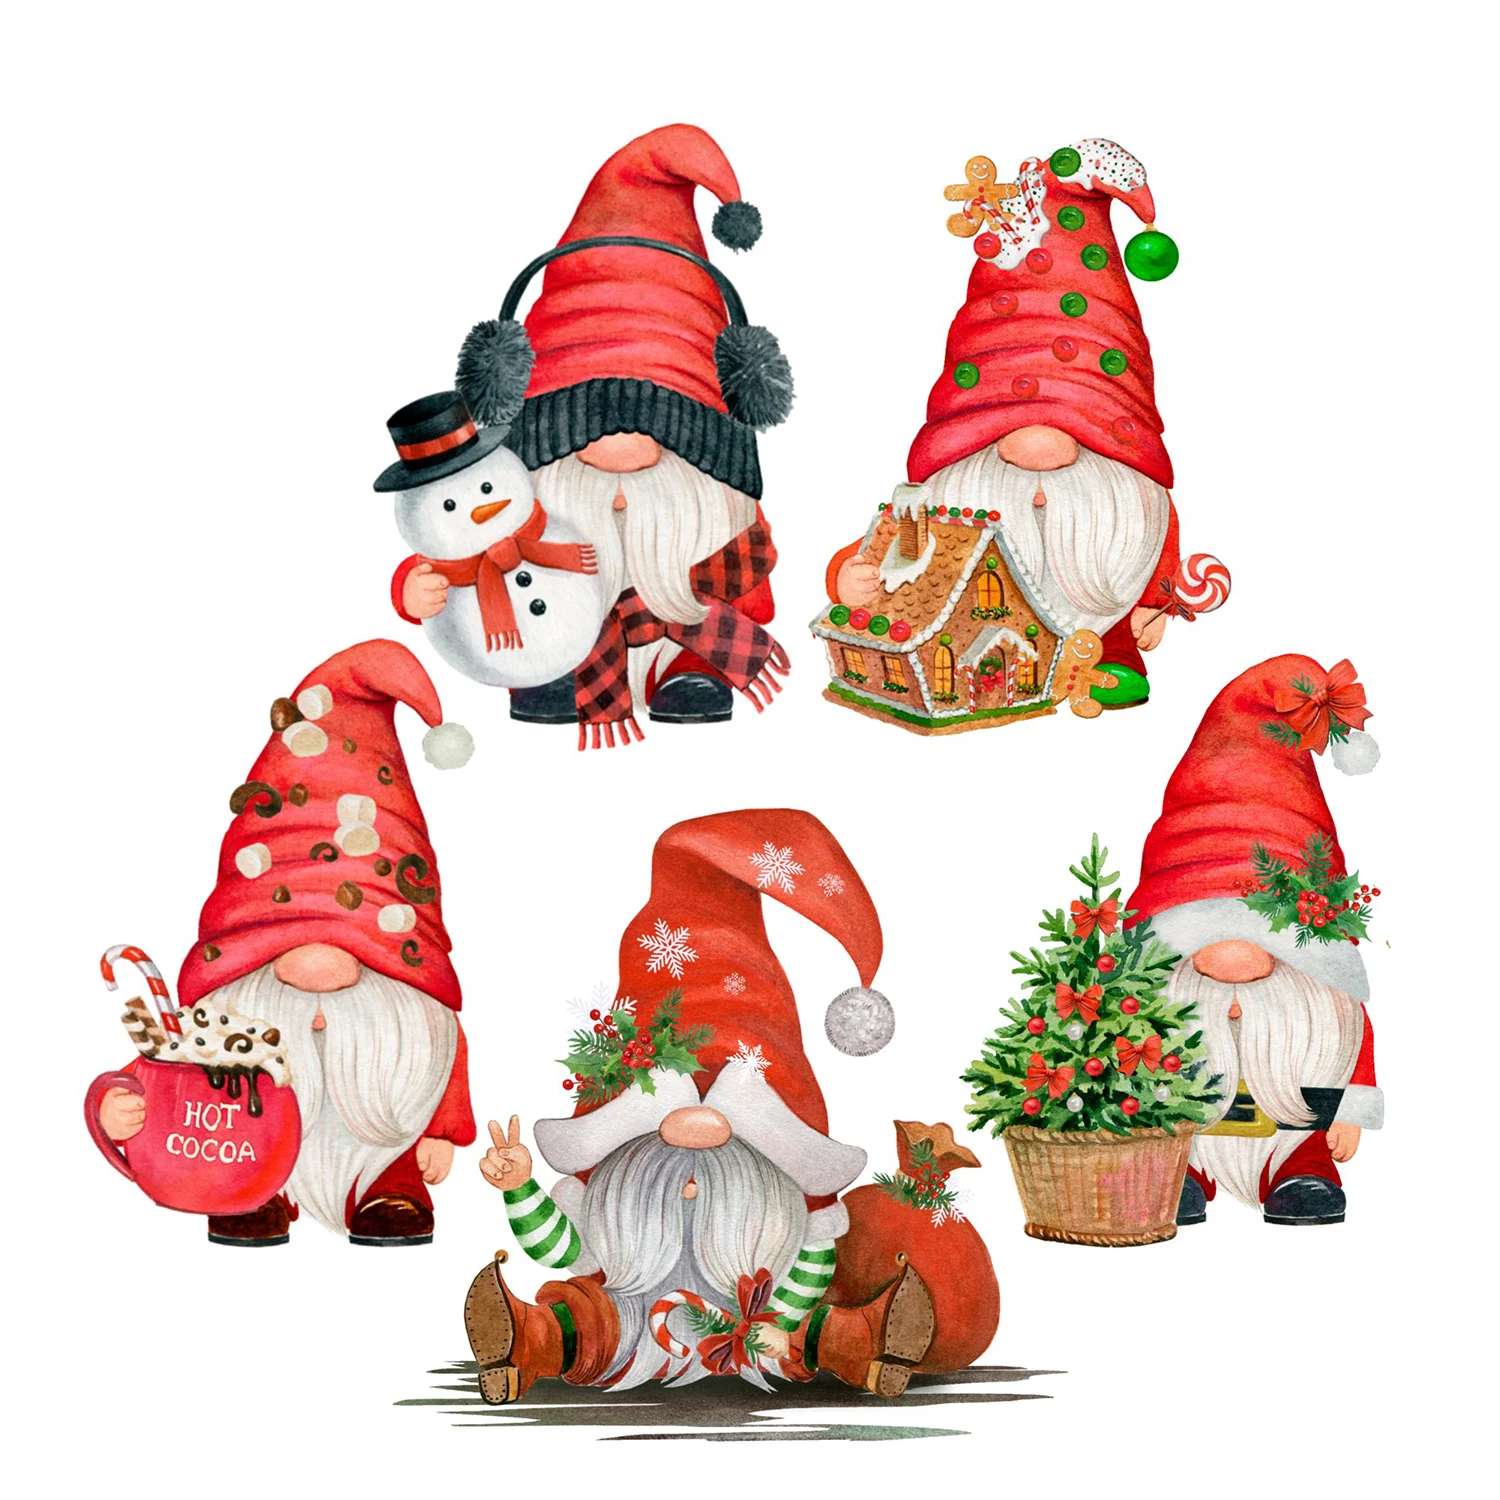 New Christmas Gnomes Cutting Dies Snowman Gingerbread House Metal Stencil For DIY Scrapbooking Card Craft Decor